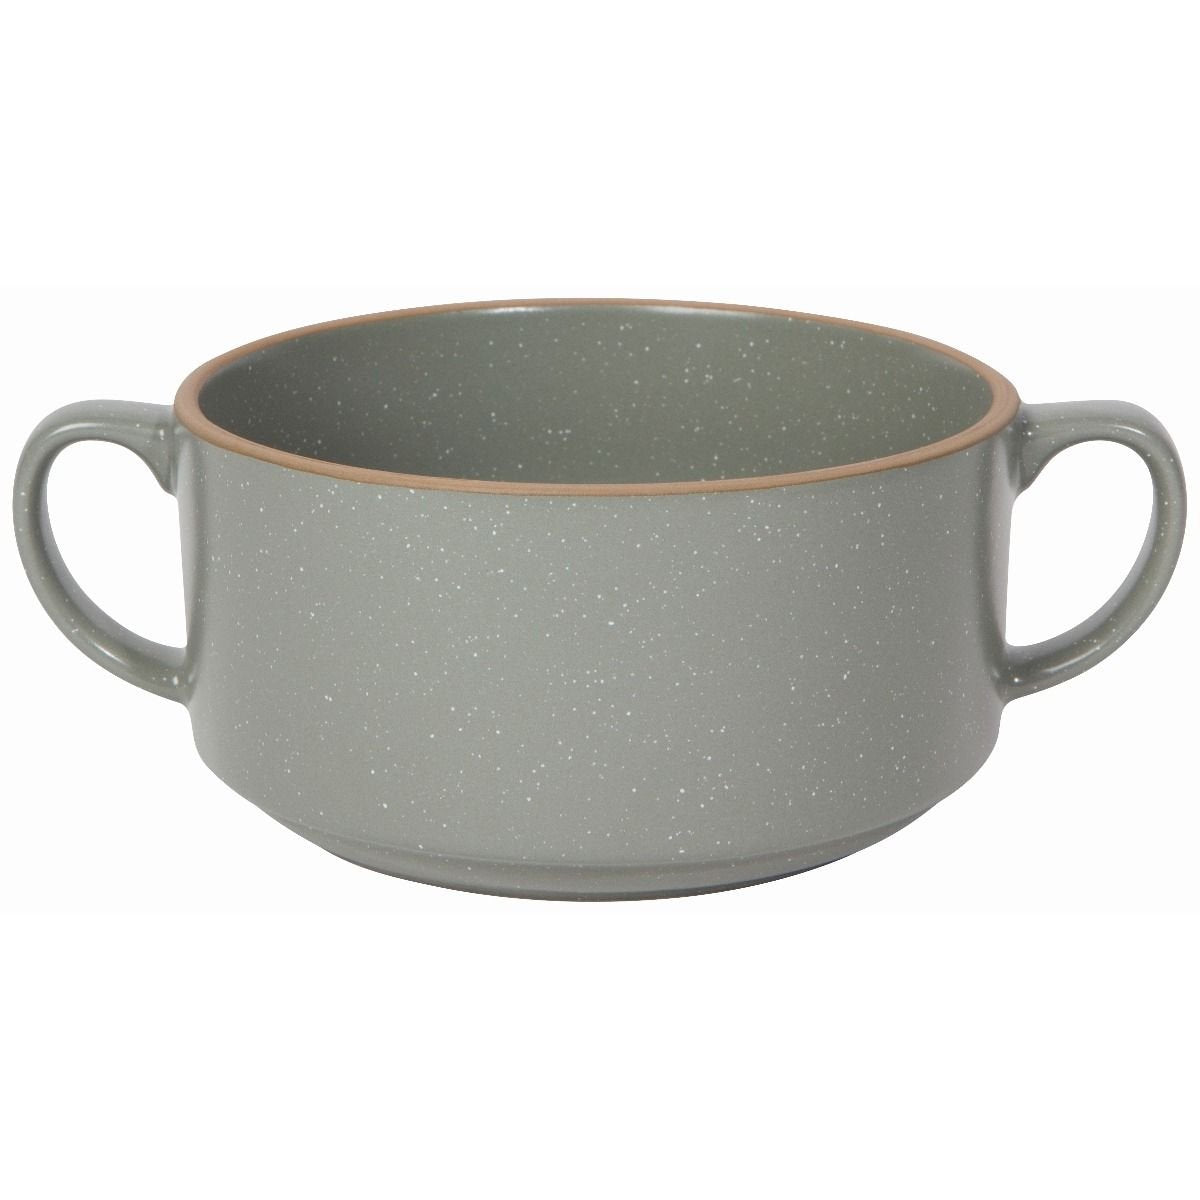 grey soup bowl with 2 handles shown on a white background.